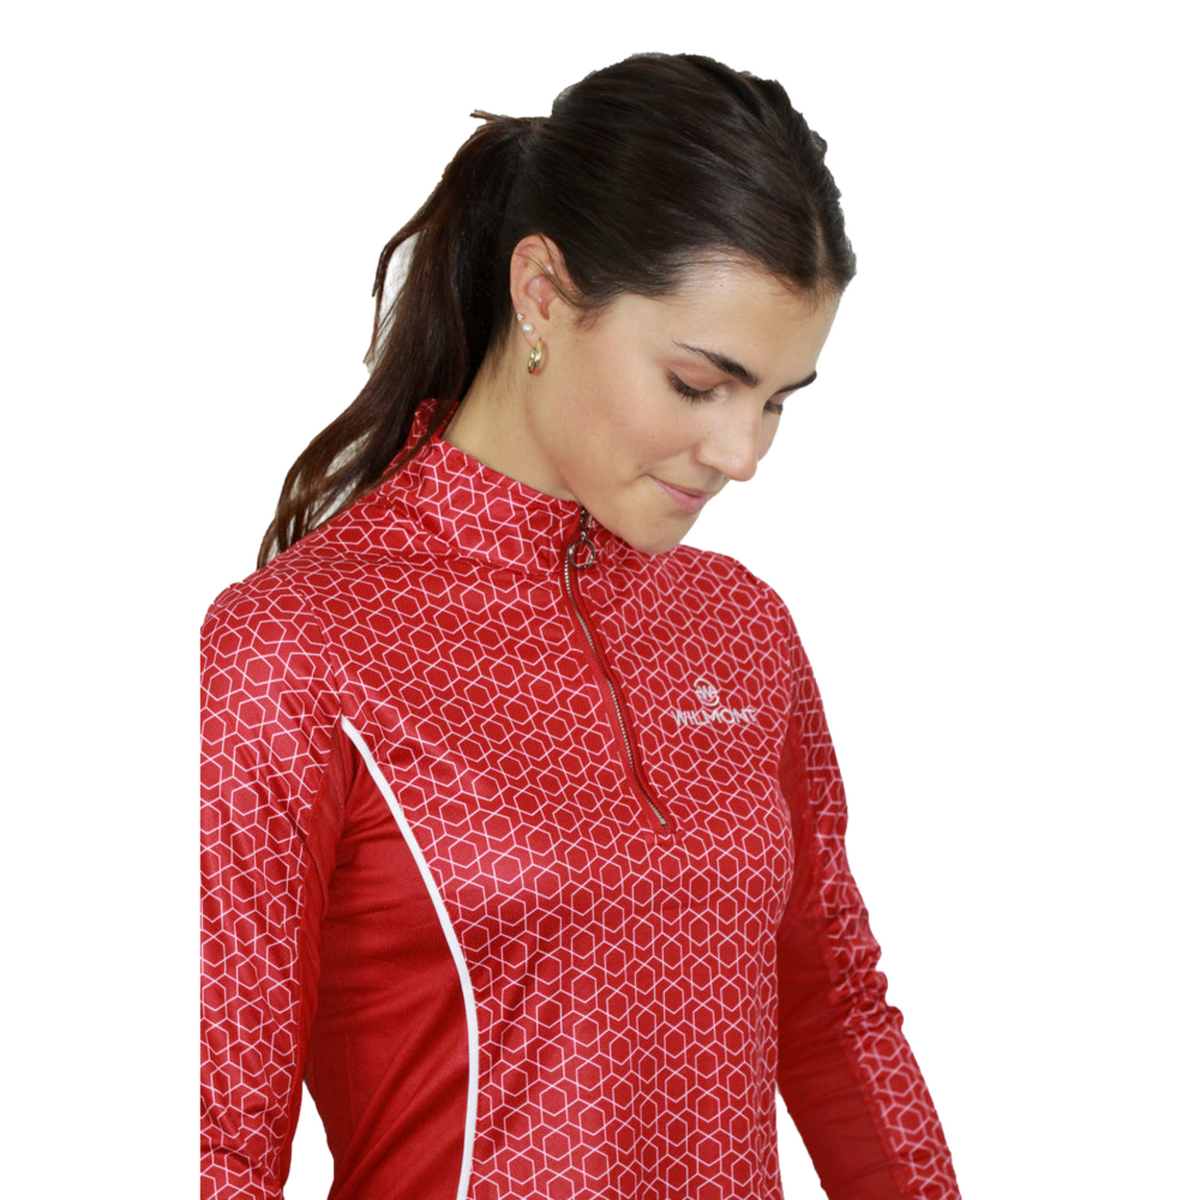 lady in red long sleeve top with white print